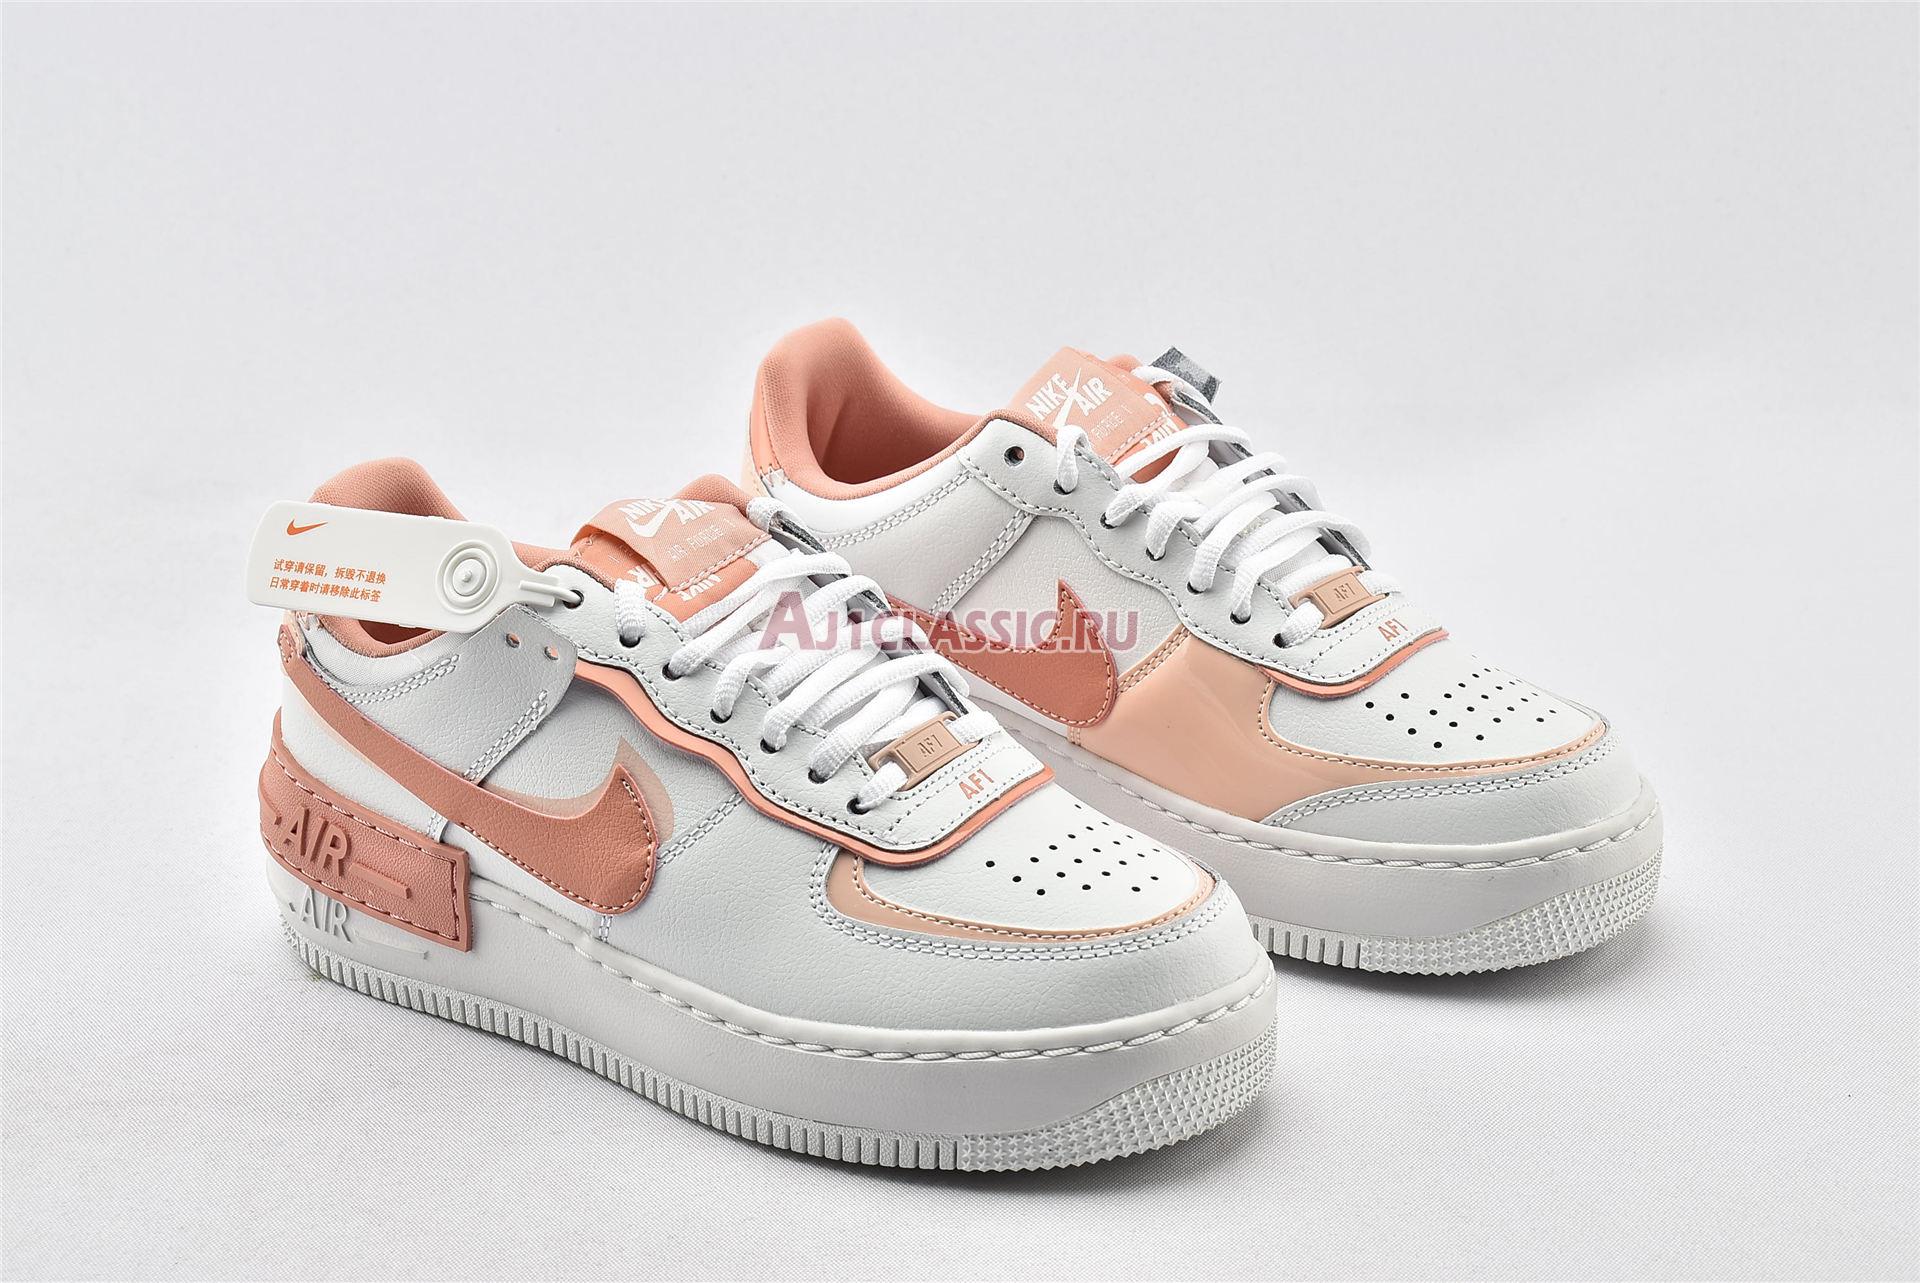 Nike Wmns Air Force 1 Shadow "Washed Coral" CJ1641-101